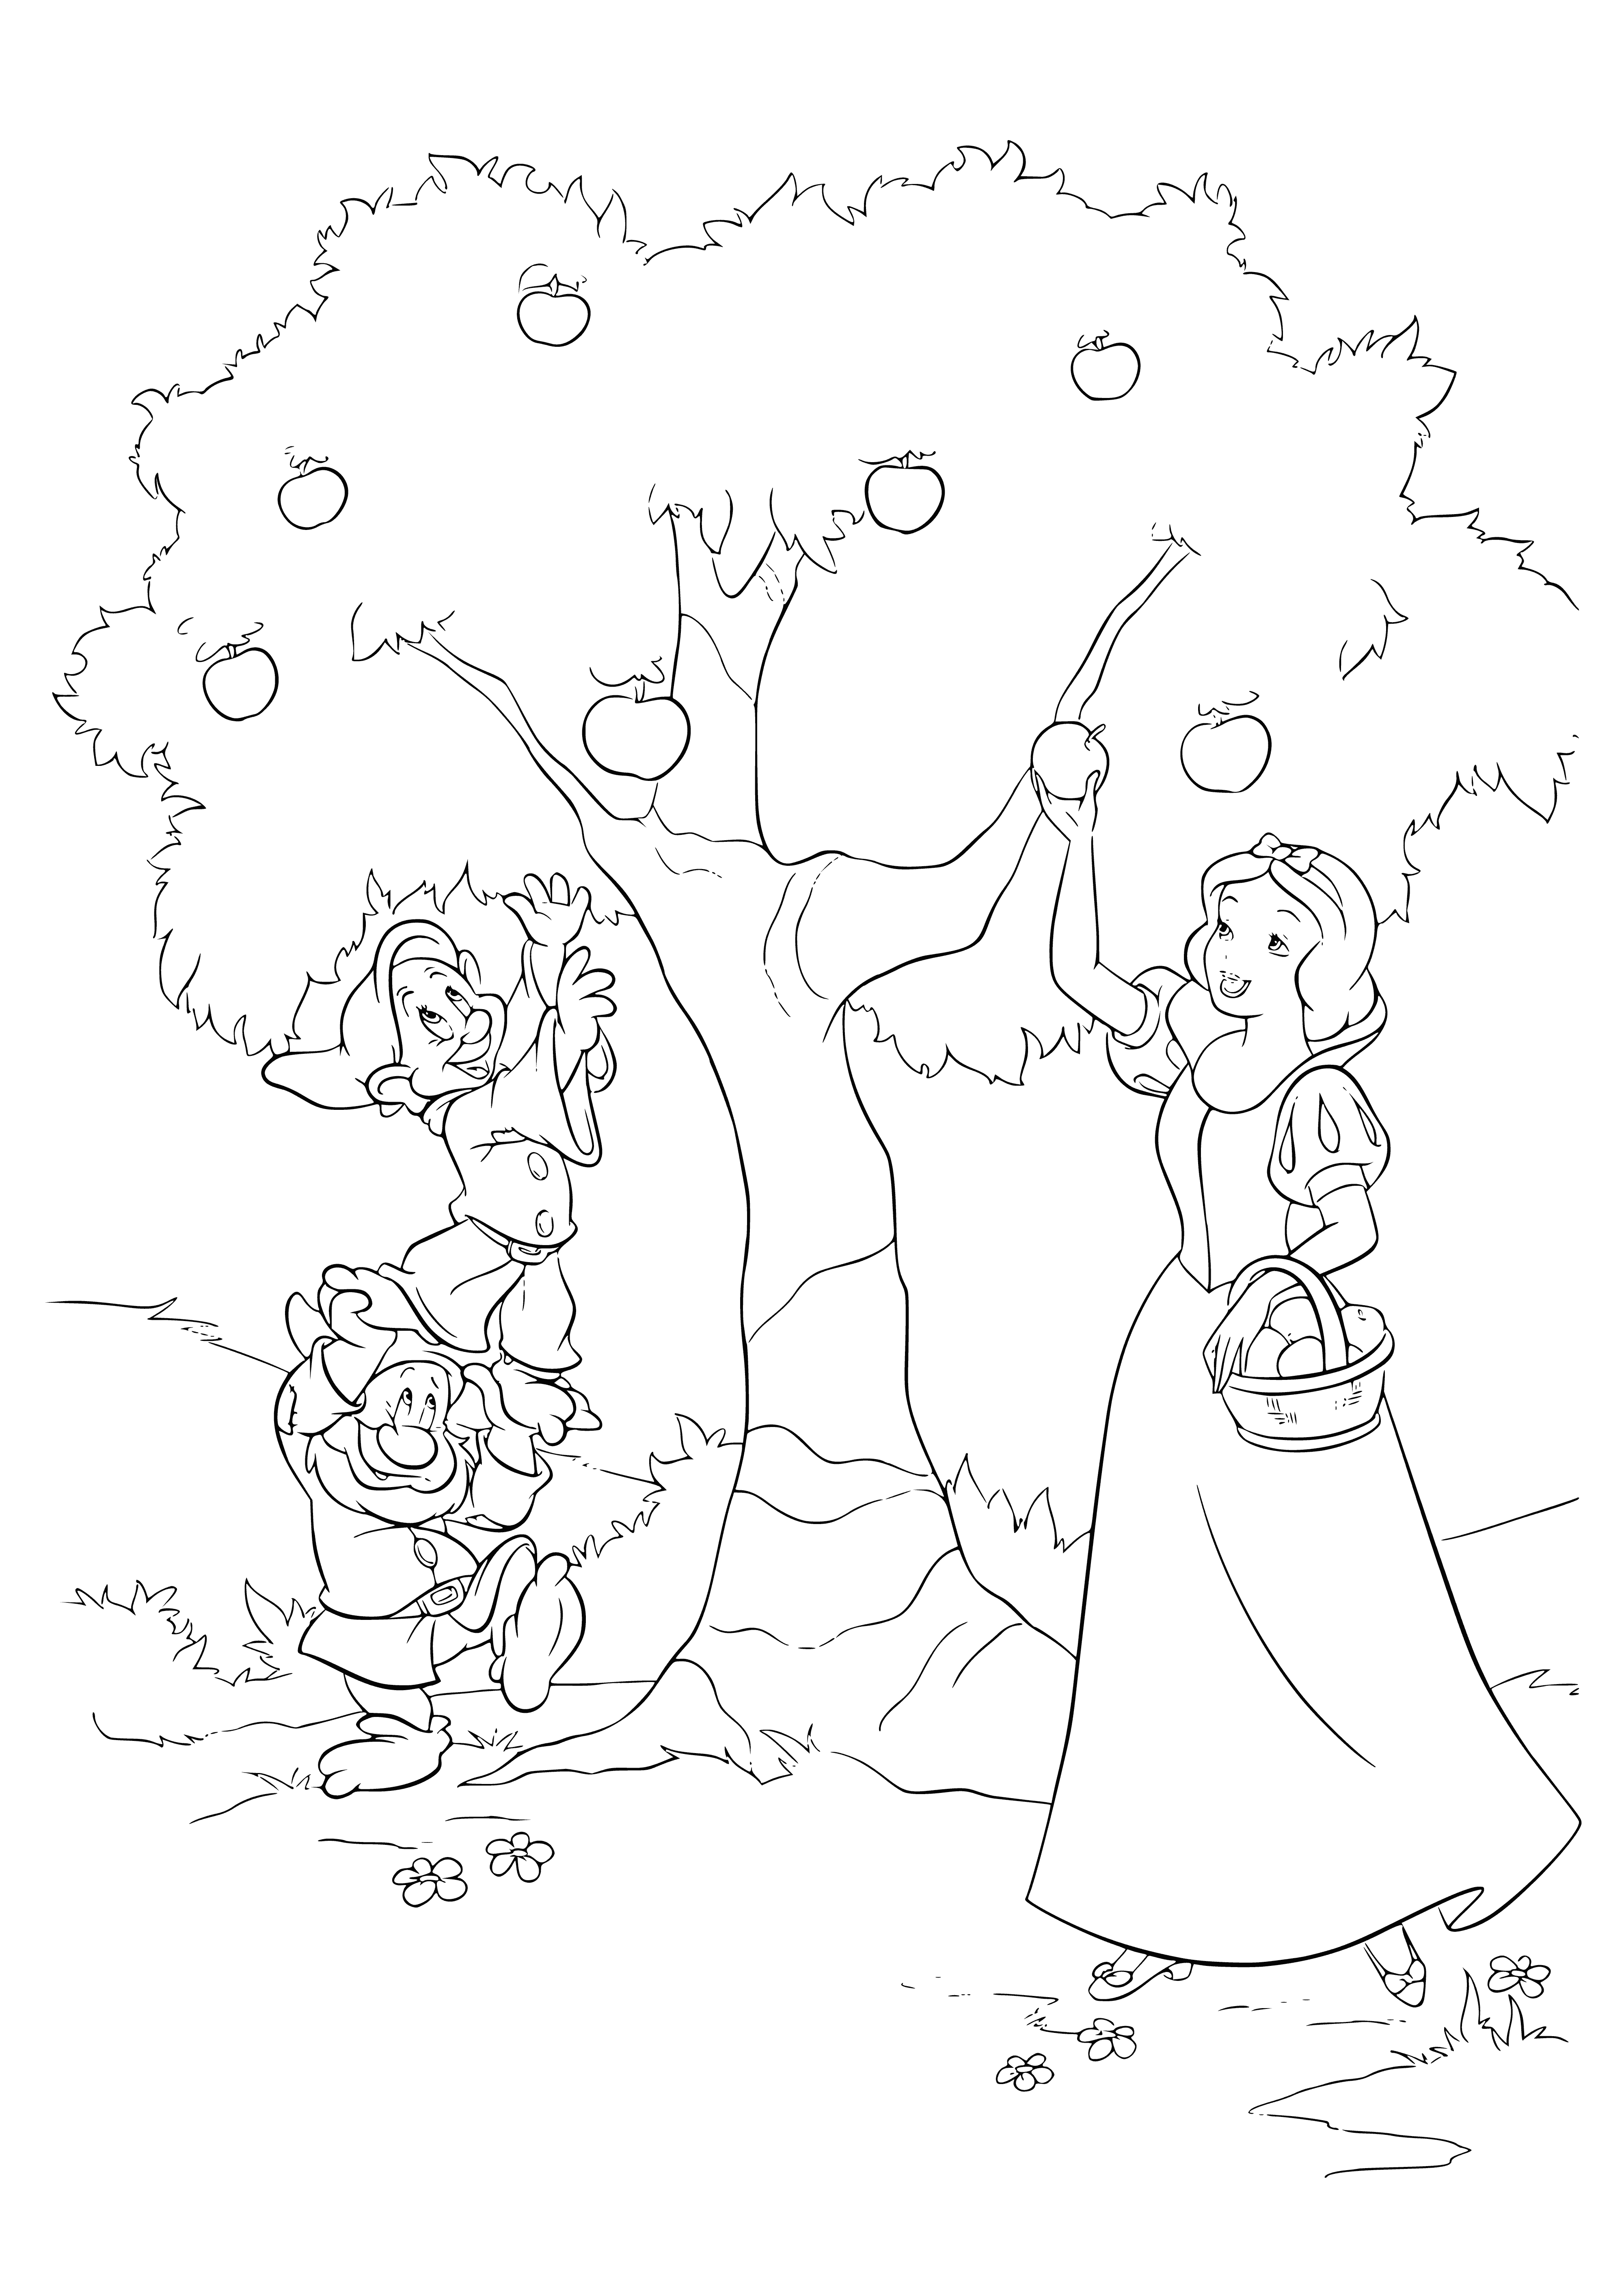 Snow white picking apples coloring page